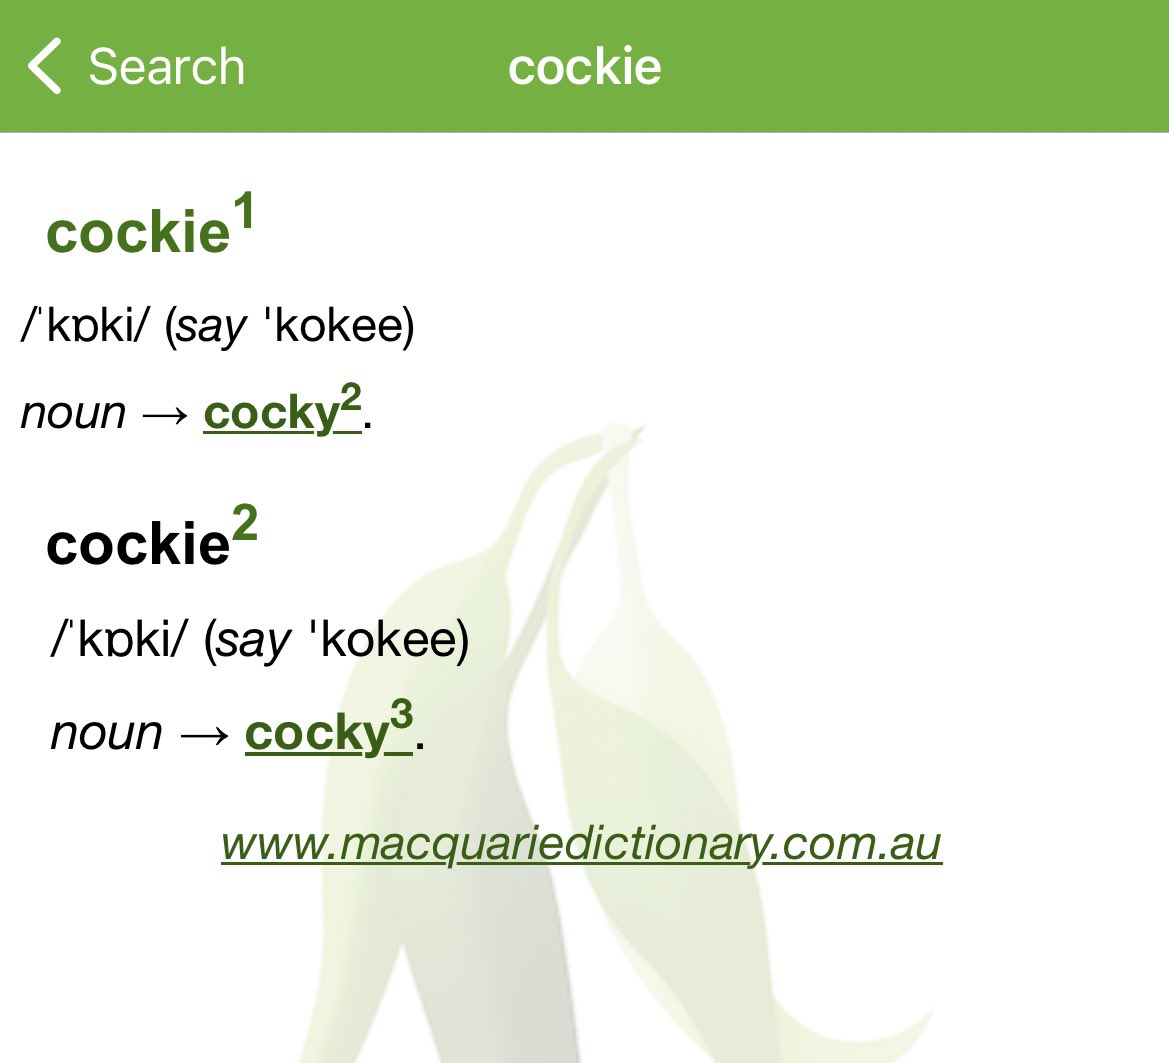 Here comes the @MacqDictionary to the rescue again. Hope this clears it up for ya